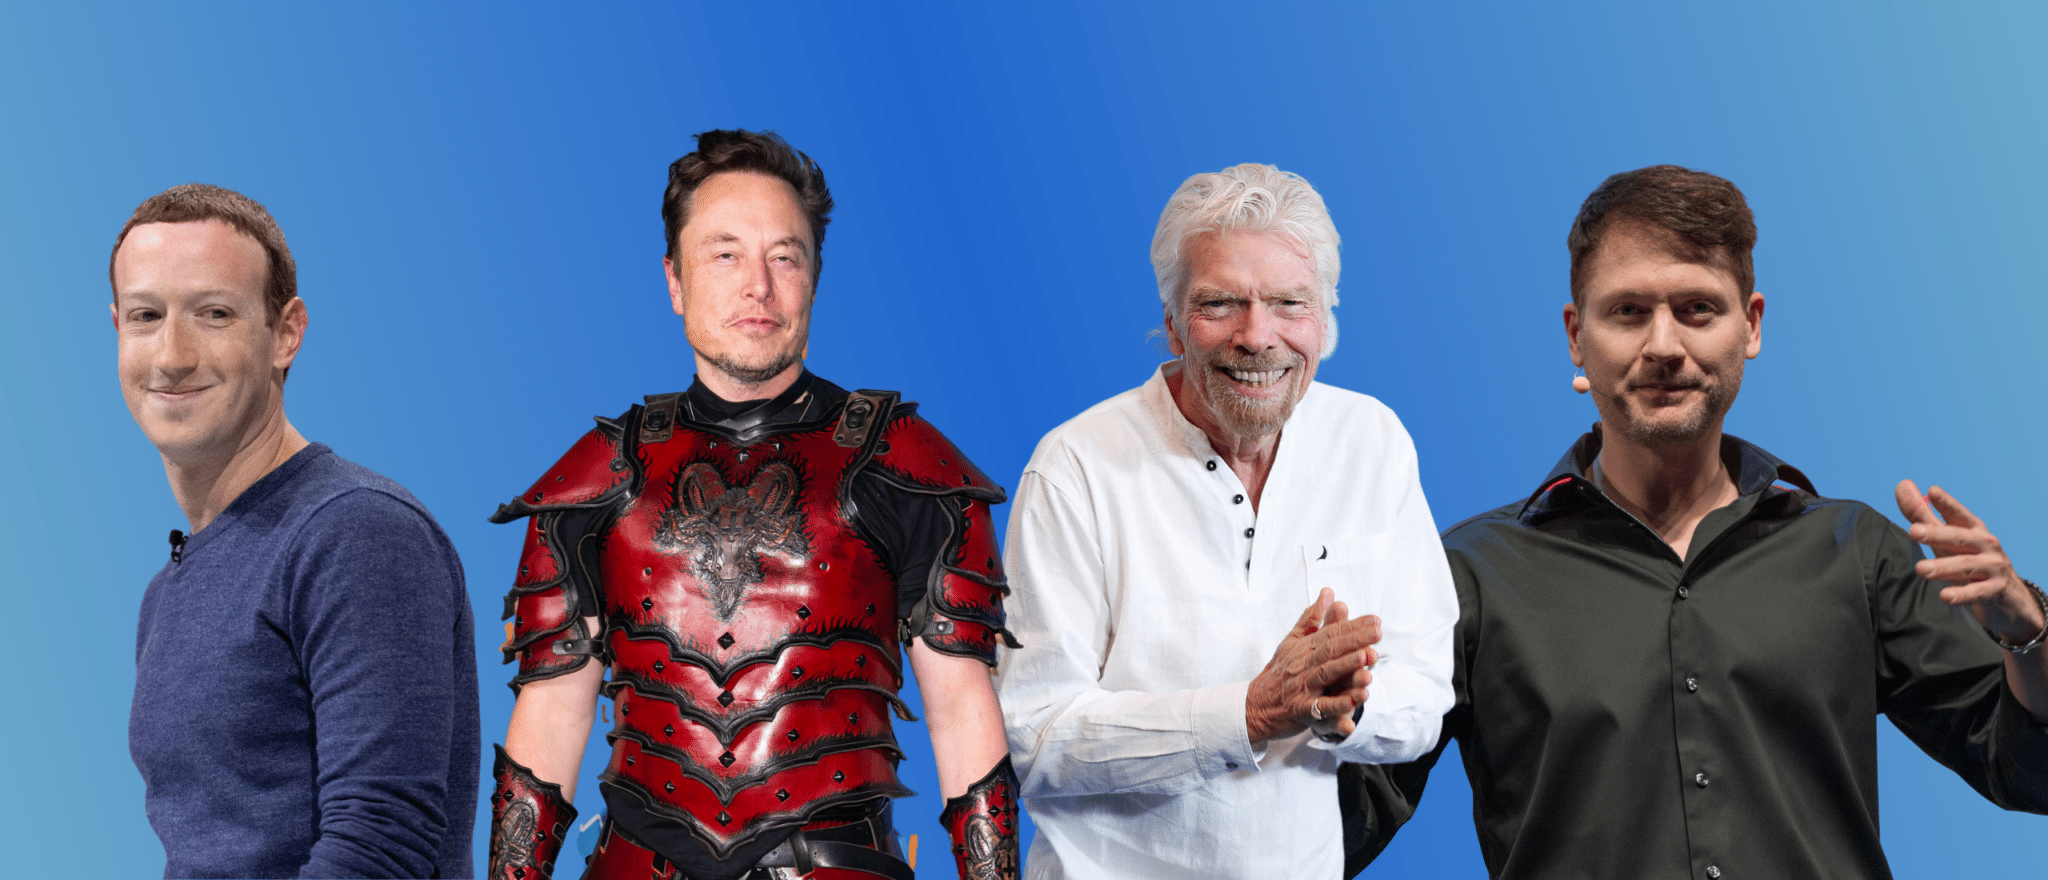 The Weird, Wild, and Not-So-Wonderful Dietary Habits of Billionaire Tech Bros